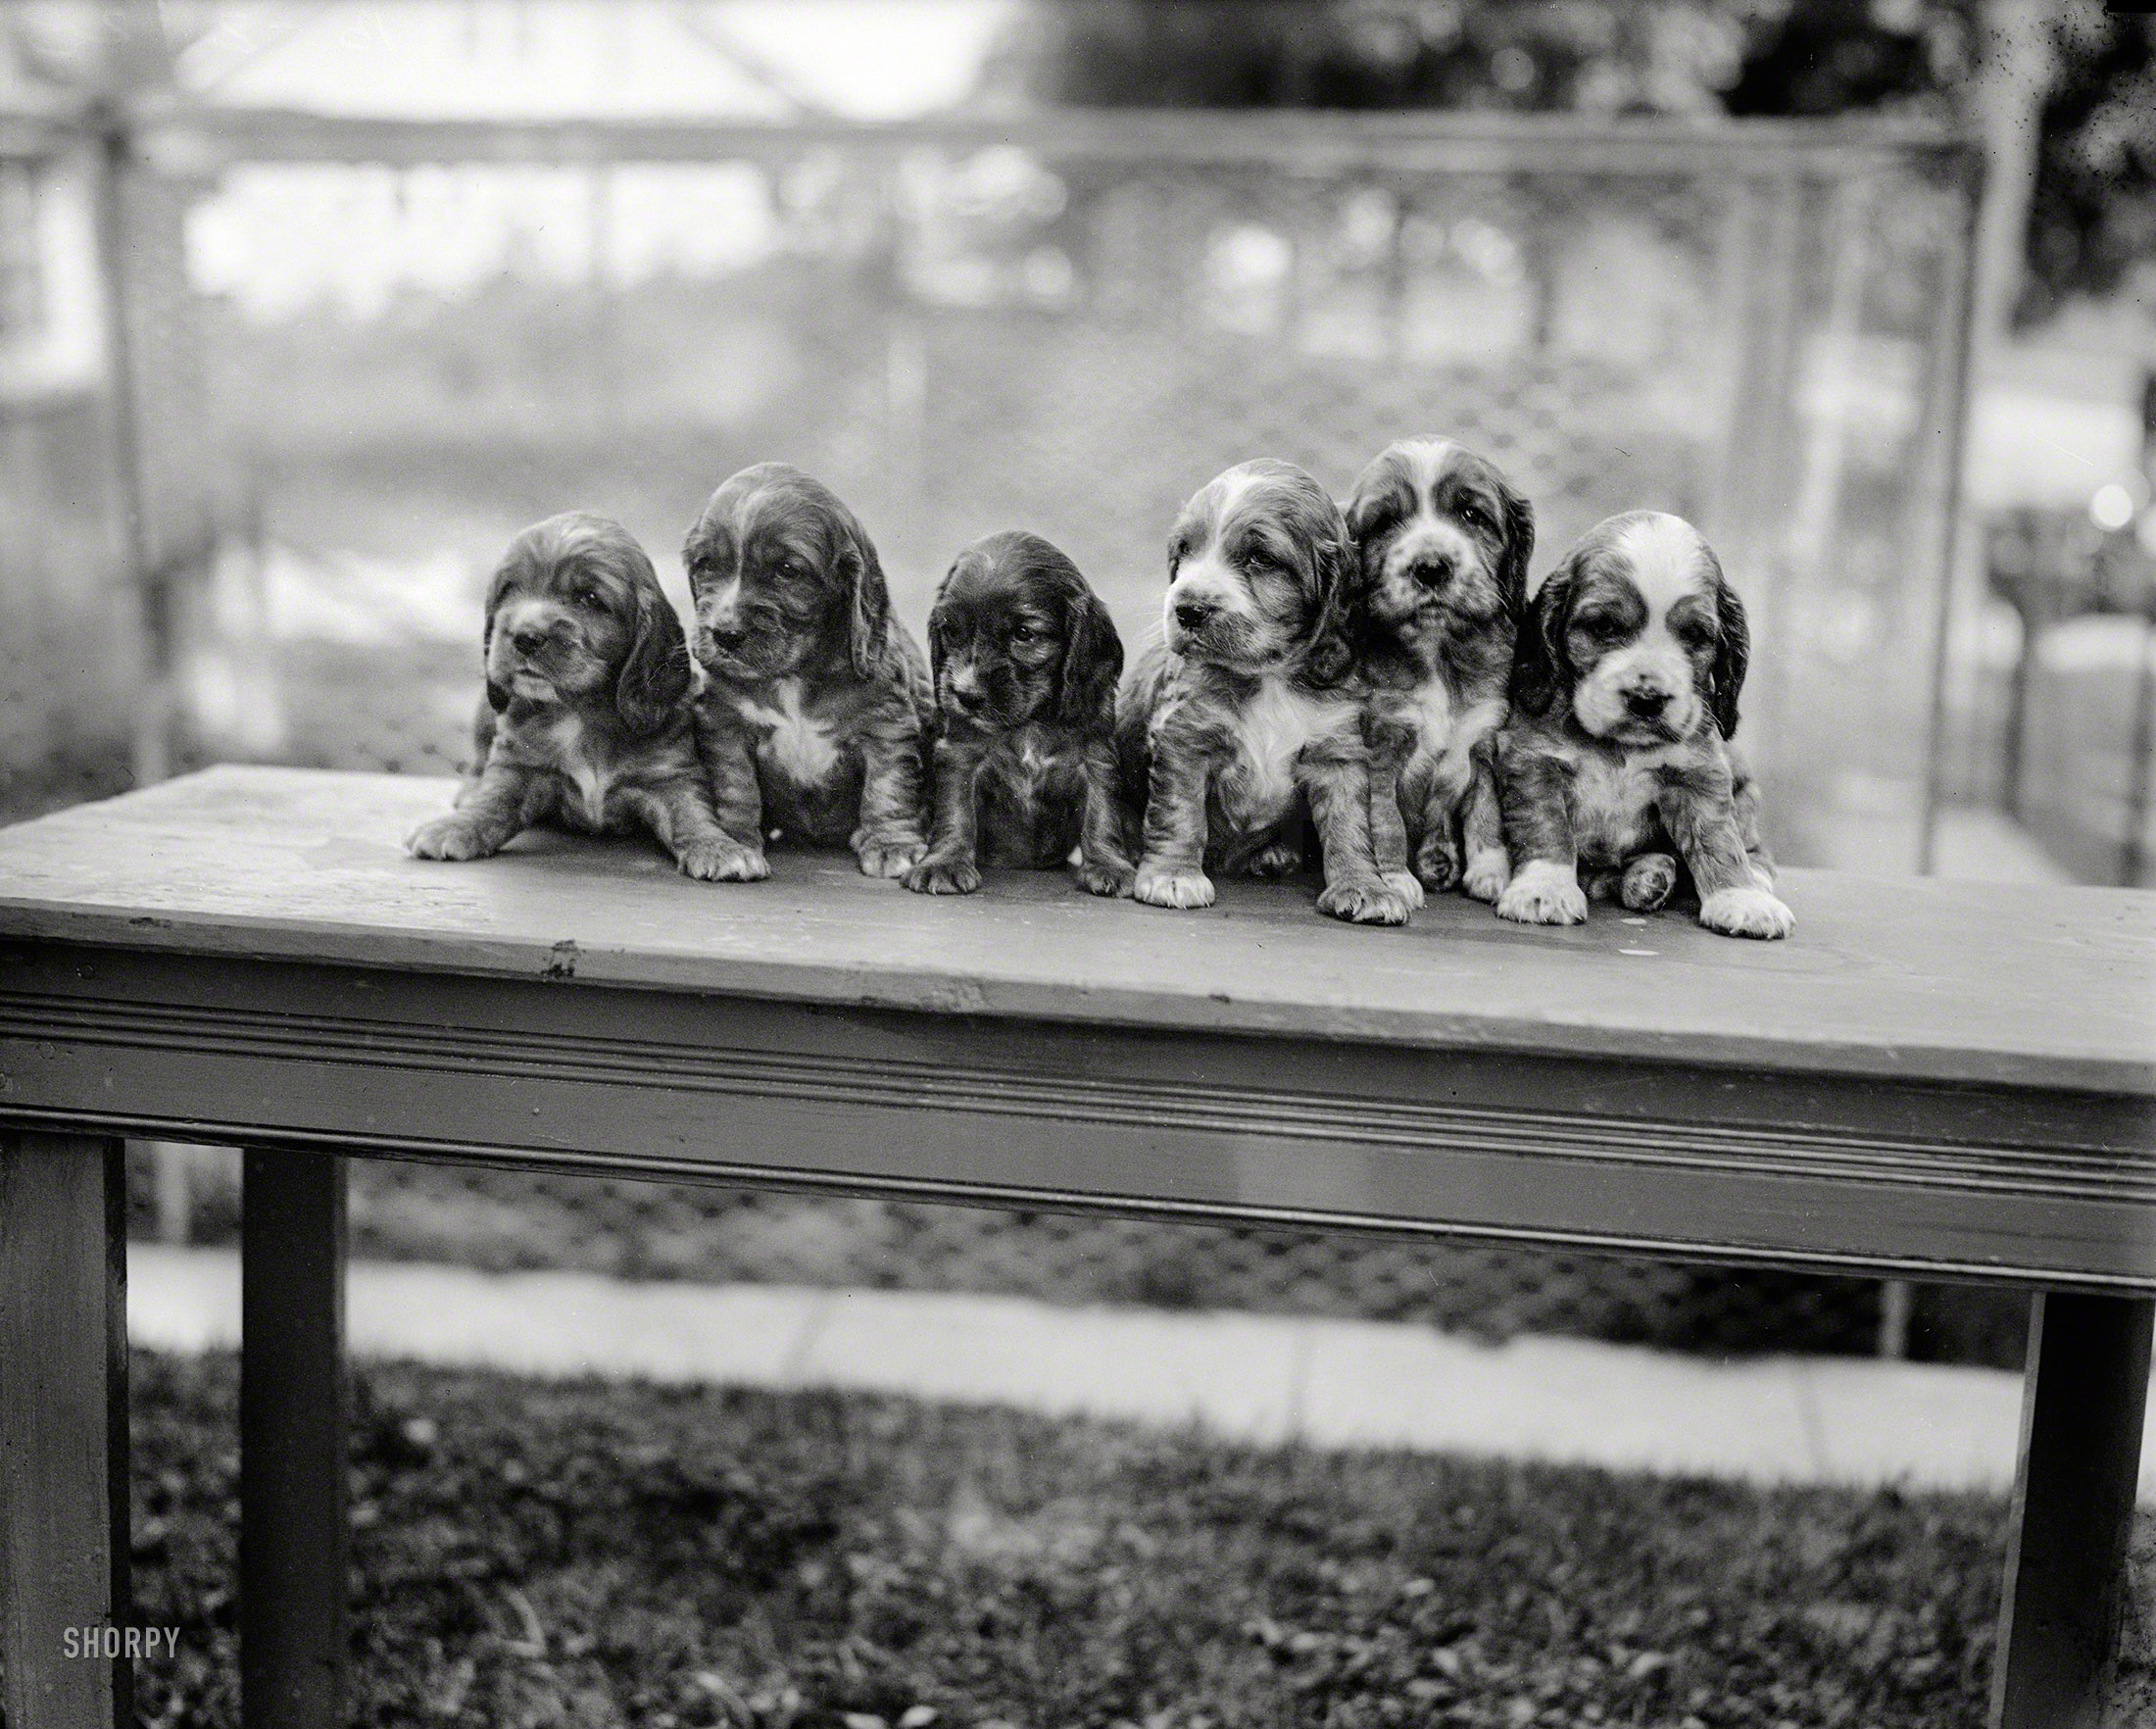 Washington, D.C., 1927. "NO CAPTION (puppies)." Where's Harry Frees when you need him? Harris & Ewing Collection glass negative. View full size.
